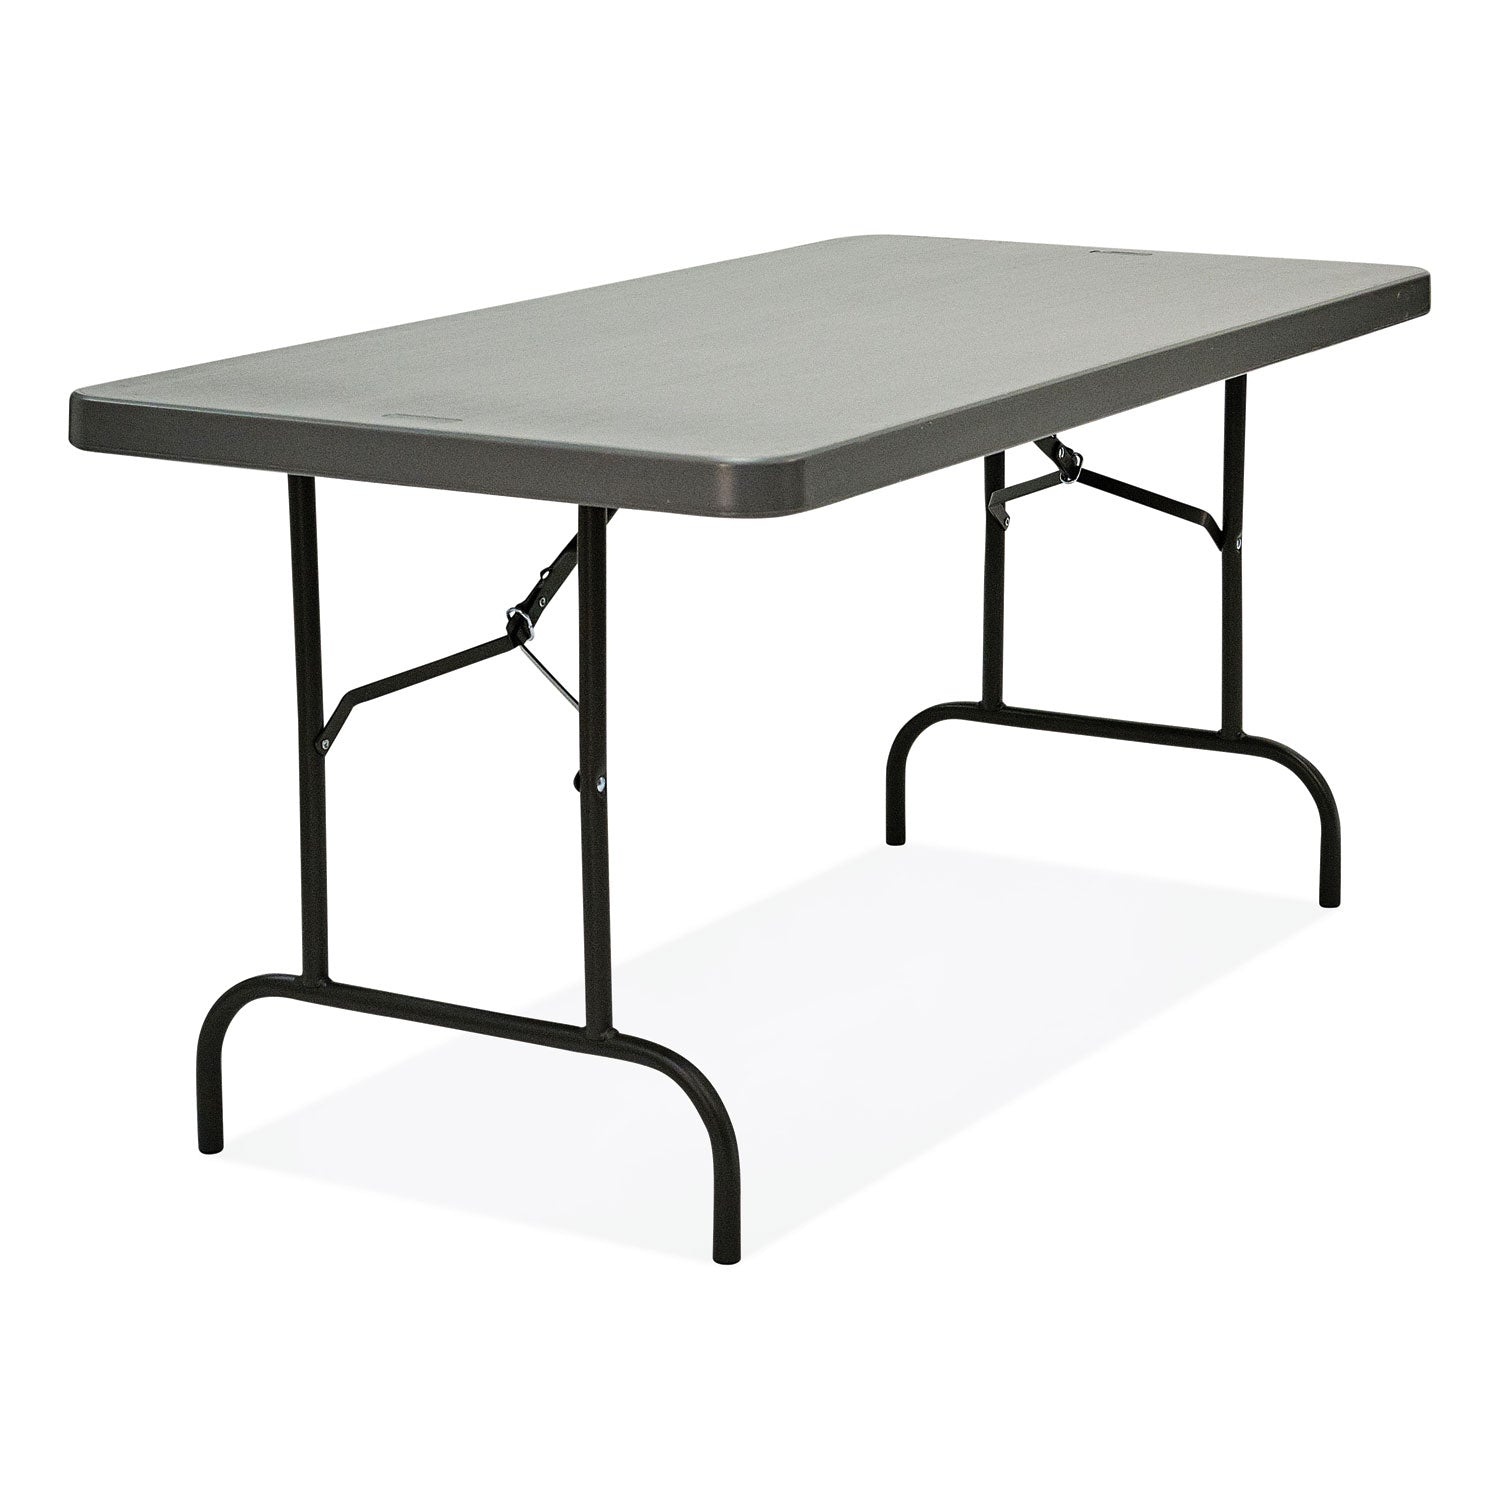 indestructable-commercial-folding-table-rectangular-60-x-30-x-29-charcoal-top-charcoal-base-legs_ice65517 - 4